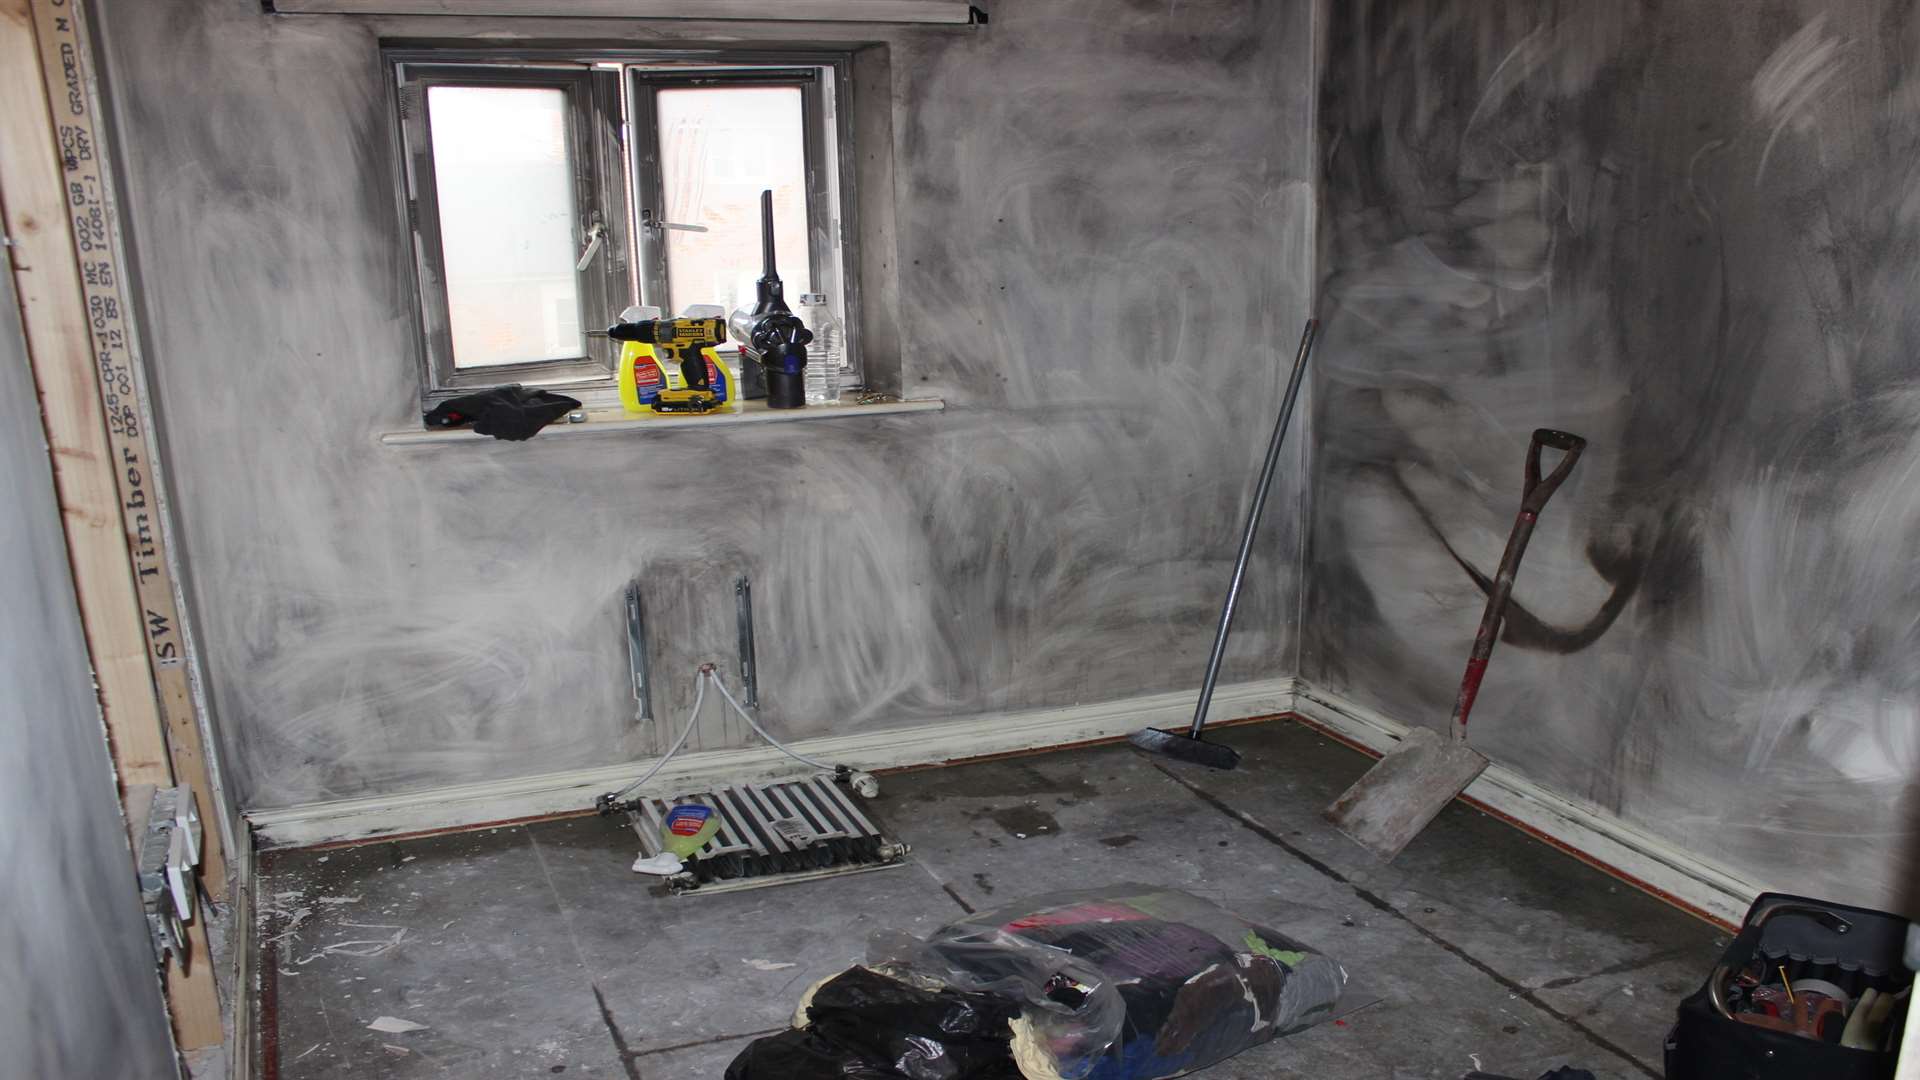 A USB cable fire caused extensive damage to a bedroom in Leanne Sullivan's home